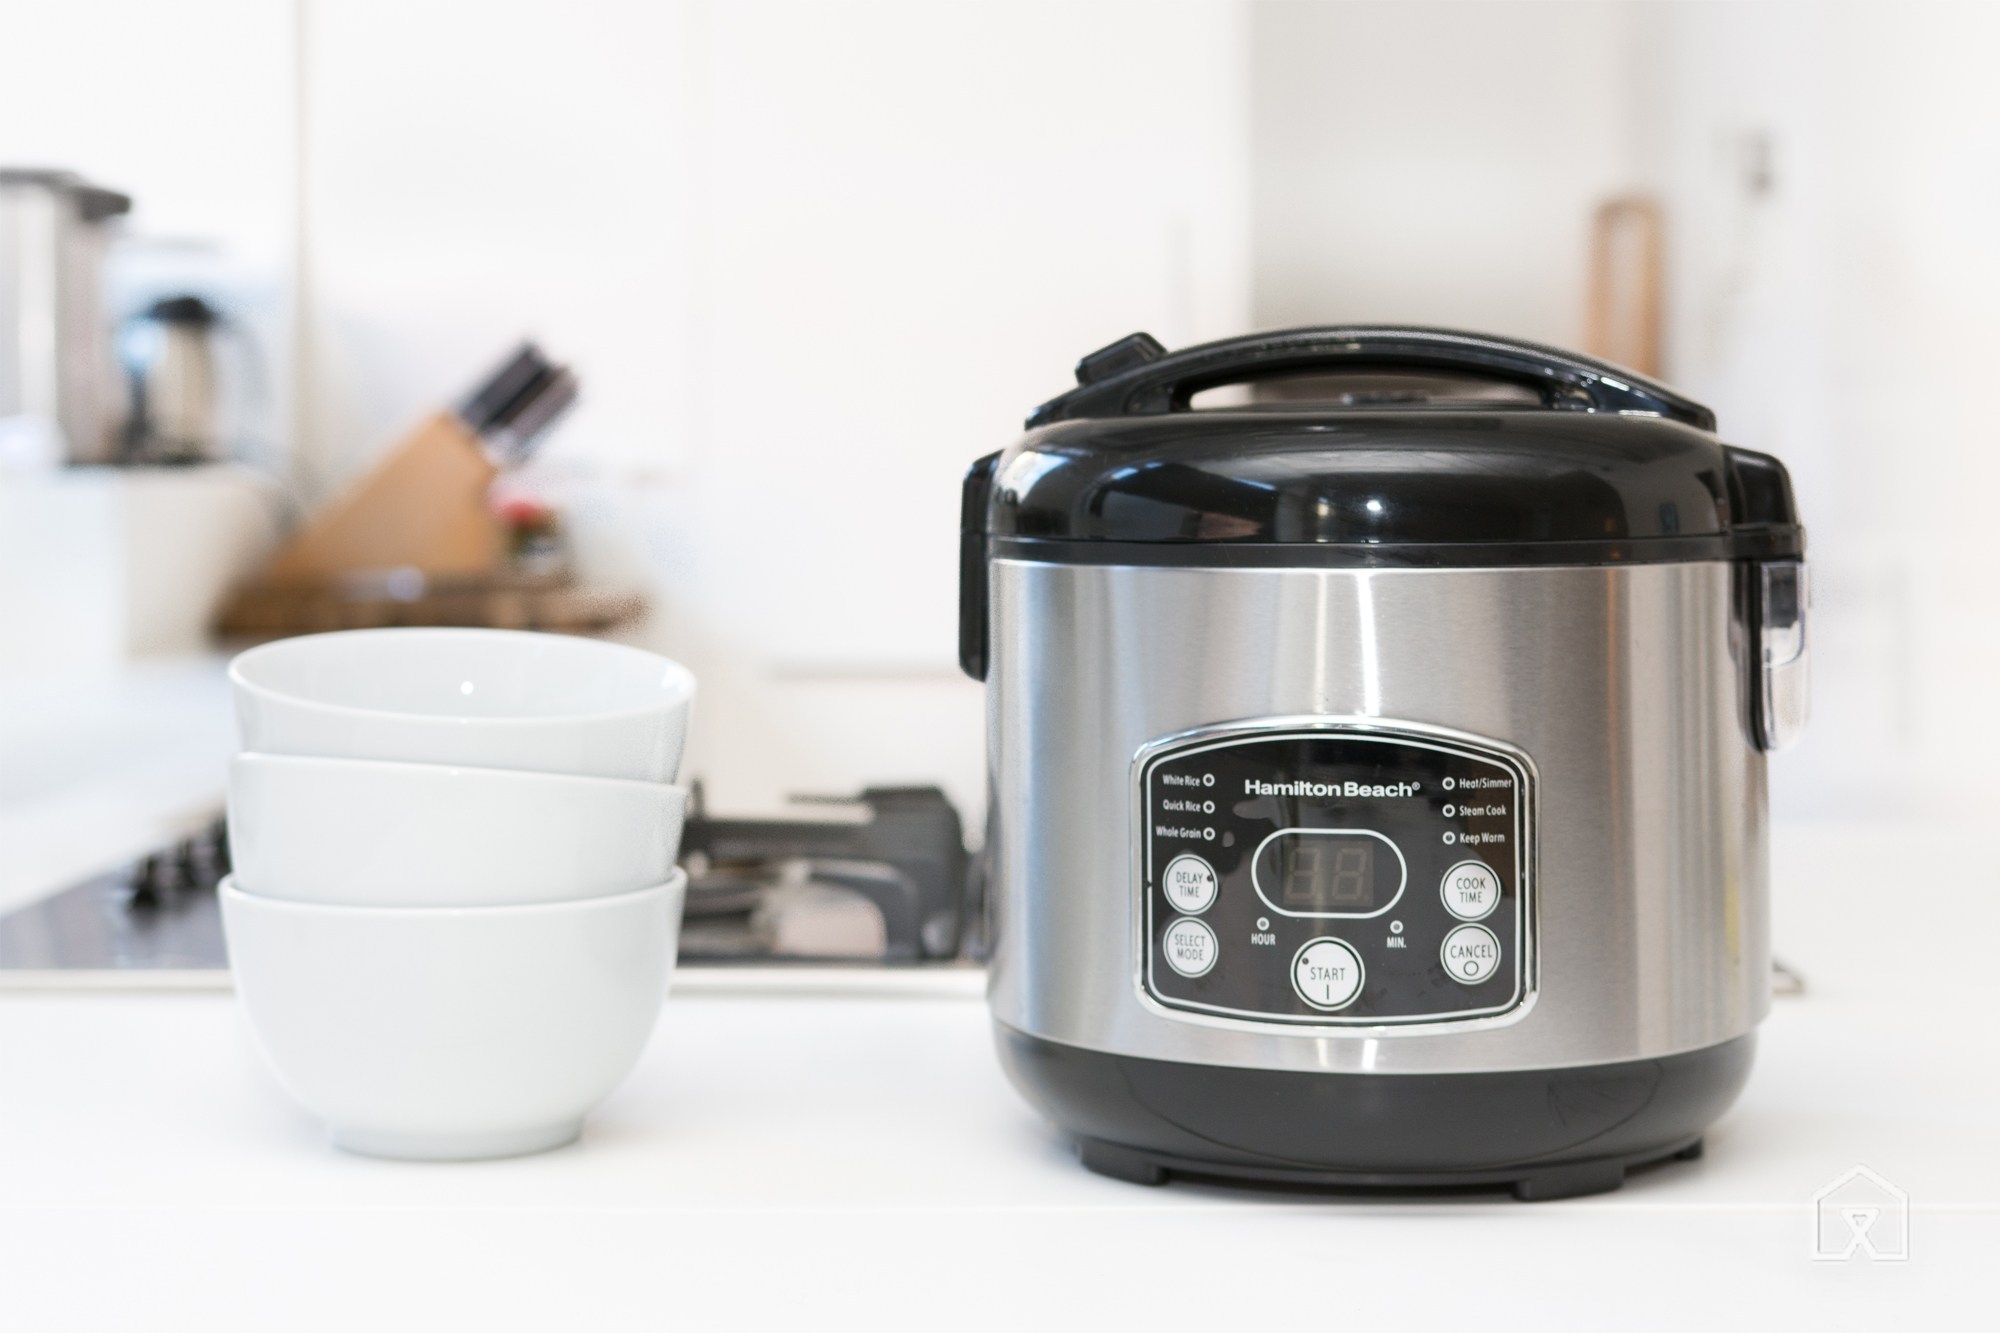 What makes rice cookers so special?